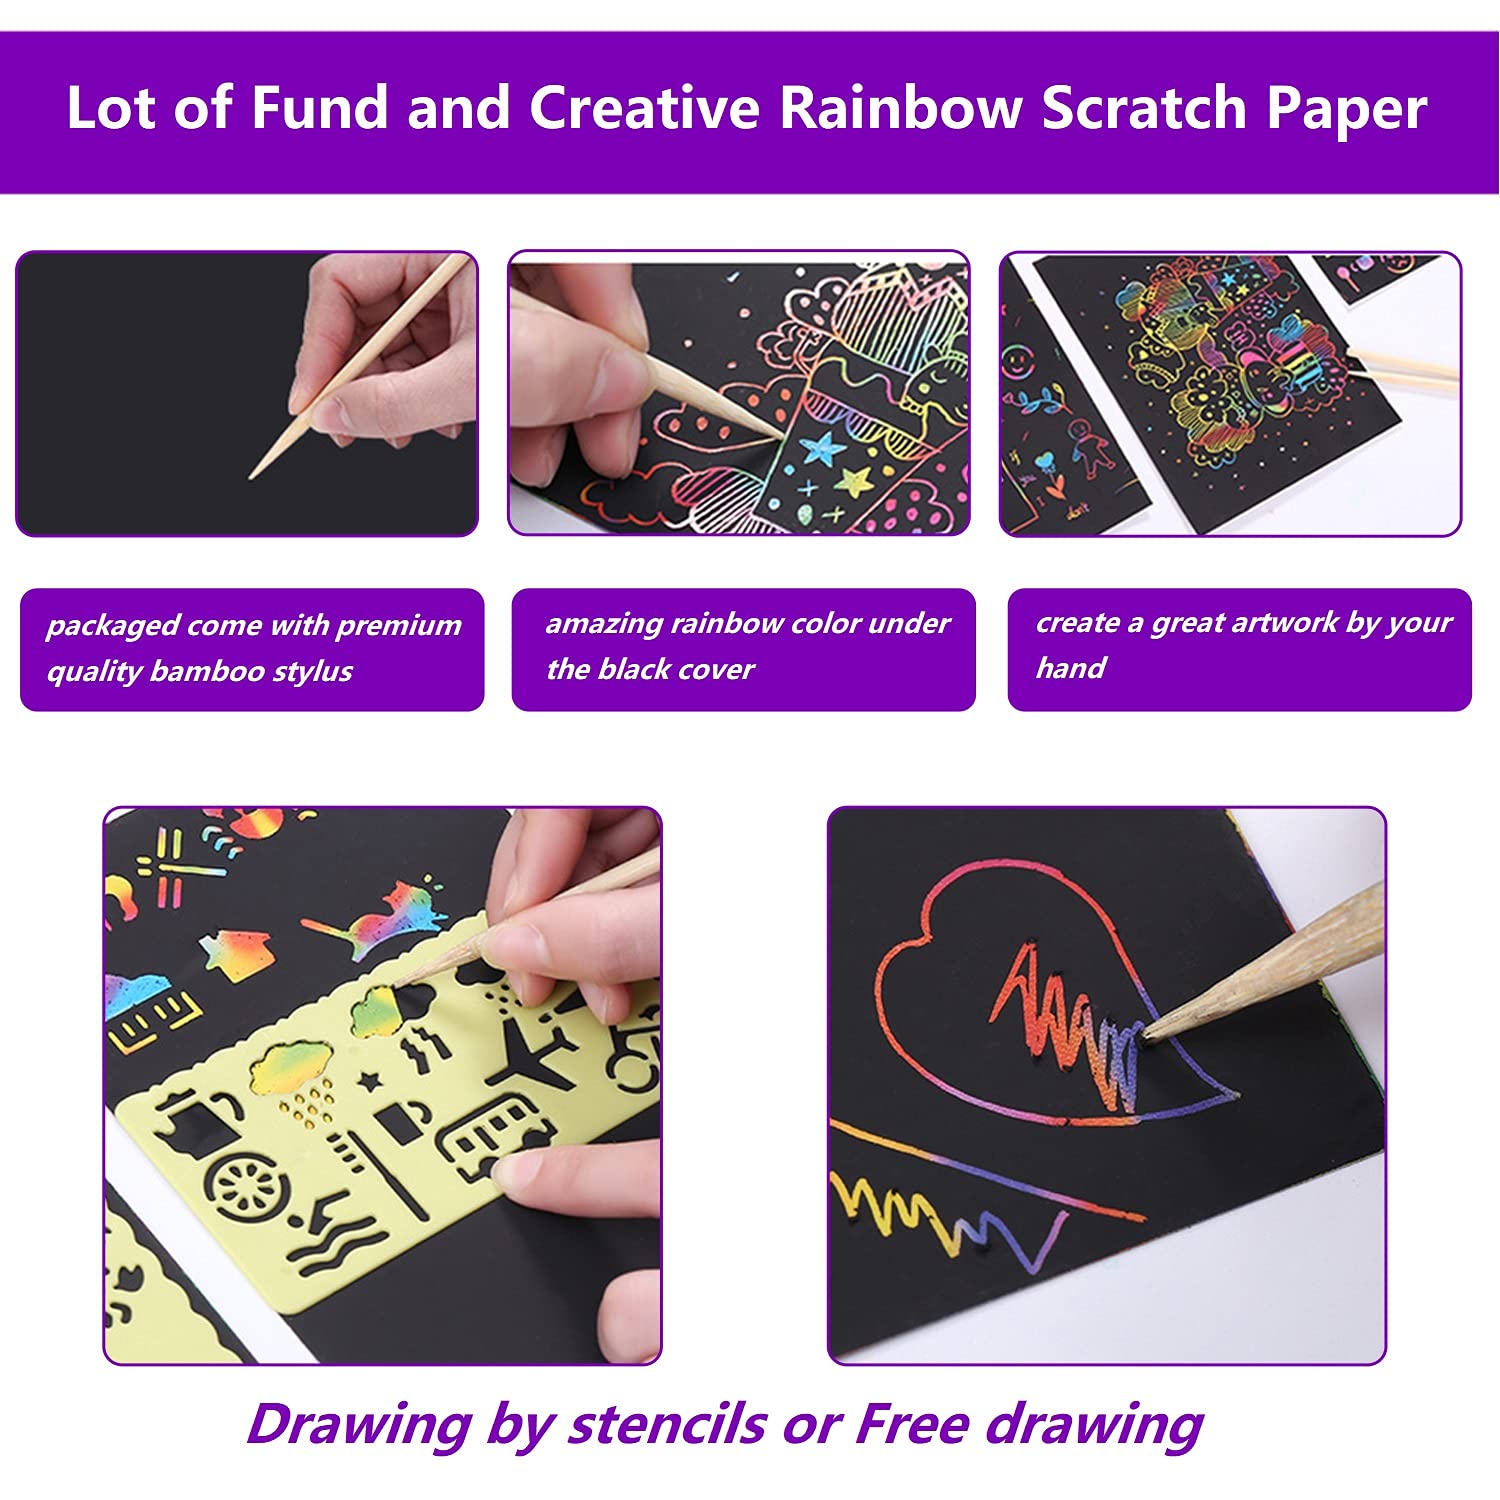 Scratch Paper Art Set, 100 Sheets Rainbow Magic Scratch Art Black Scratch it Off Paper Crafts Notes Drawing Boards Sheet with 10 Wooden Stylus and 4 Stencils for Kids DIY Christmas Birthday Gift Card